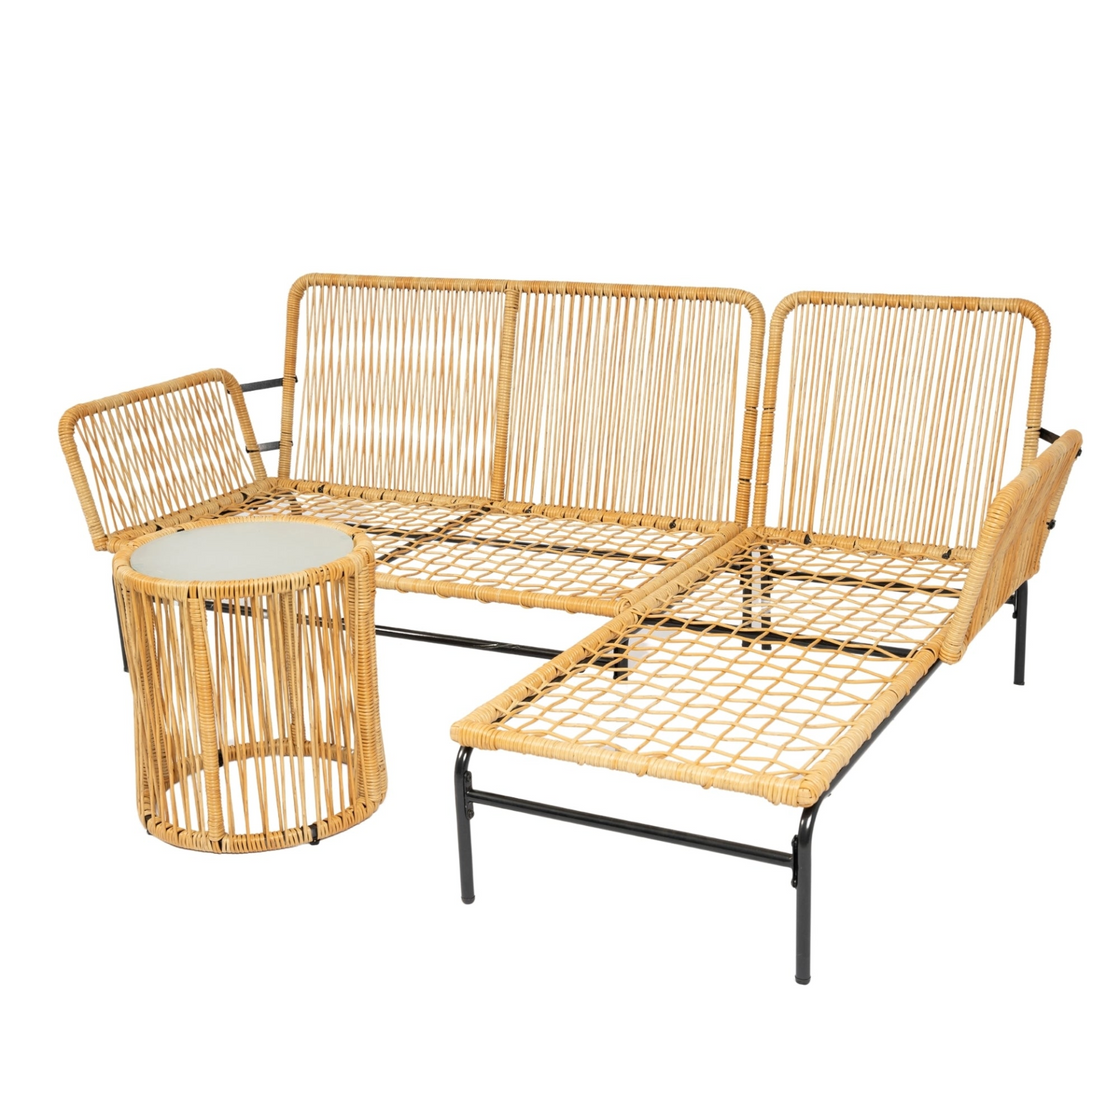 3 Pieces Outdoor Patio Wicker Furniture Sets - Natural Yellow Wicker + Creme Cushion